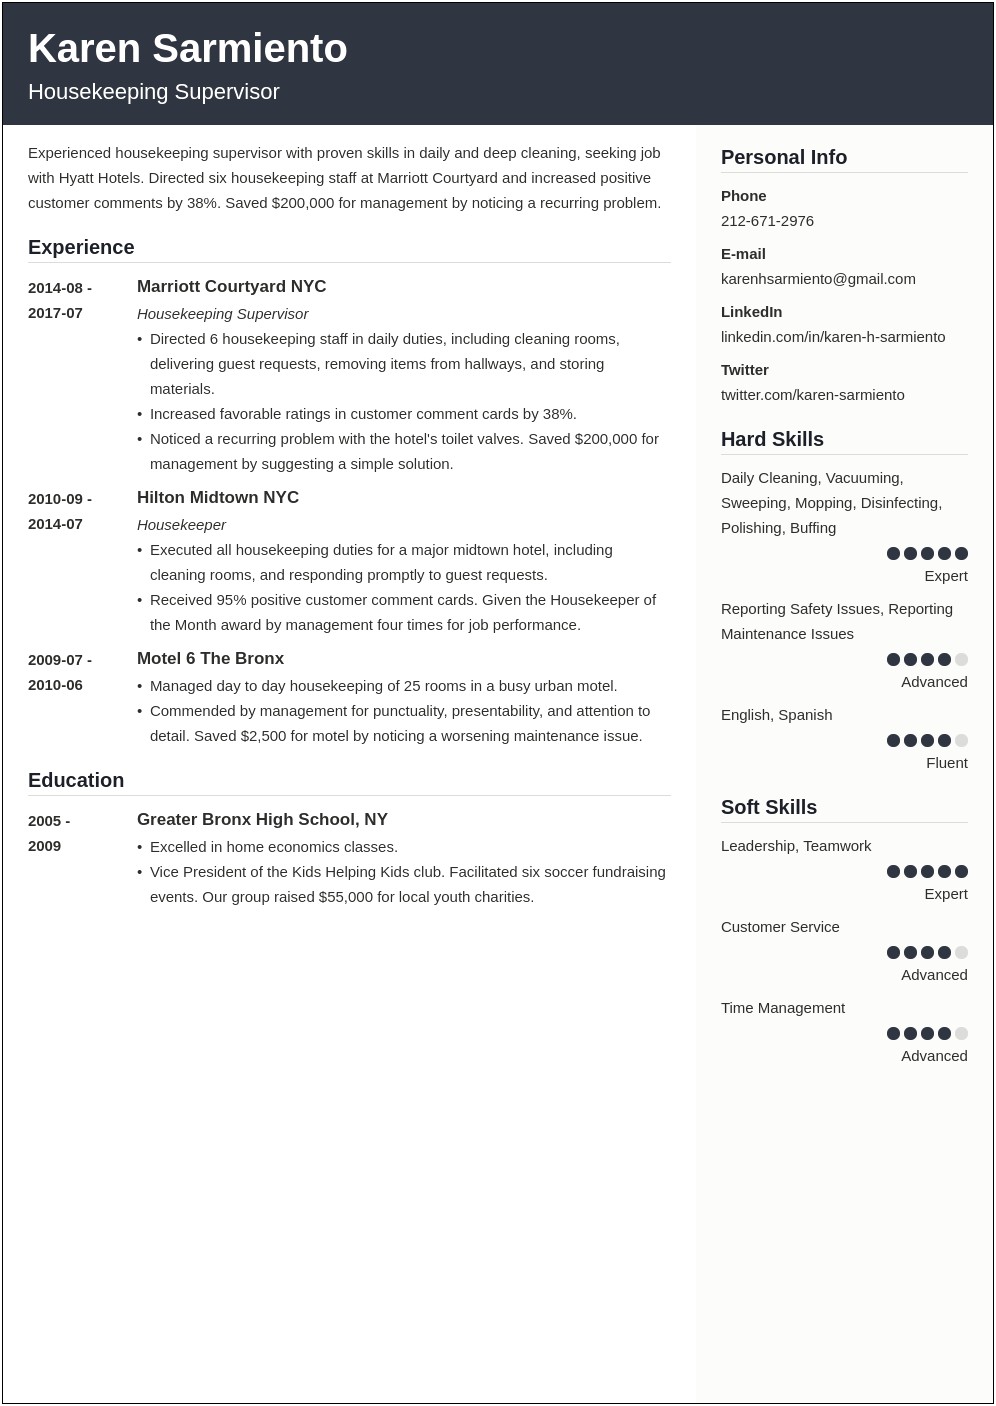 Professional Summary For House Cleaner Resume